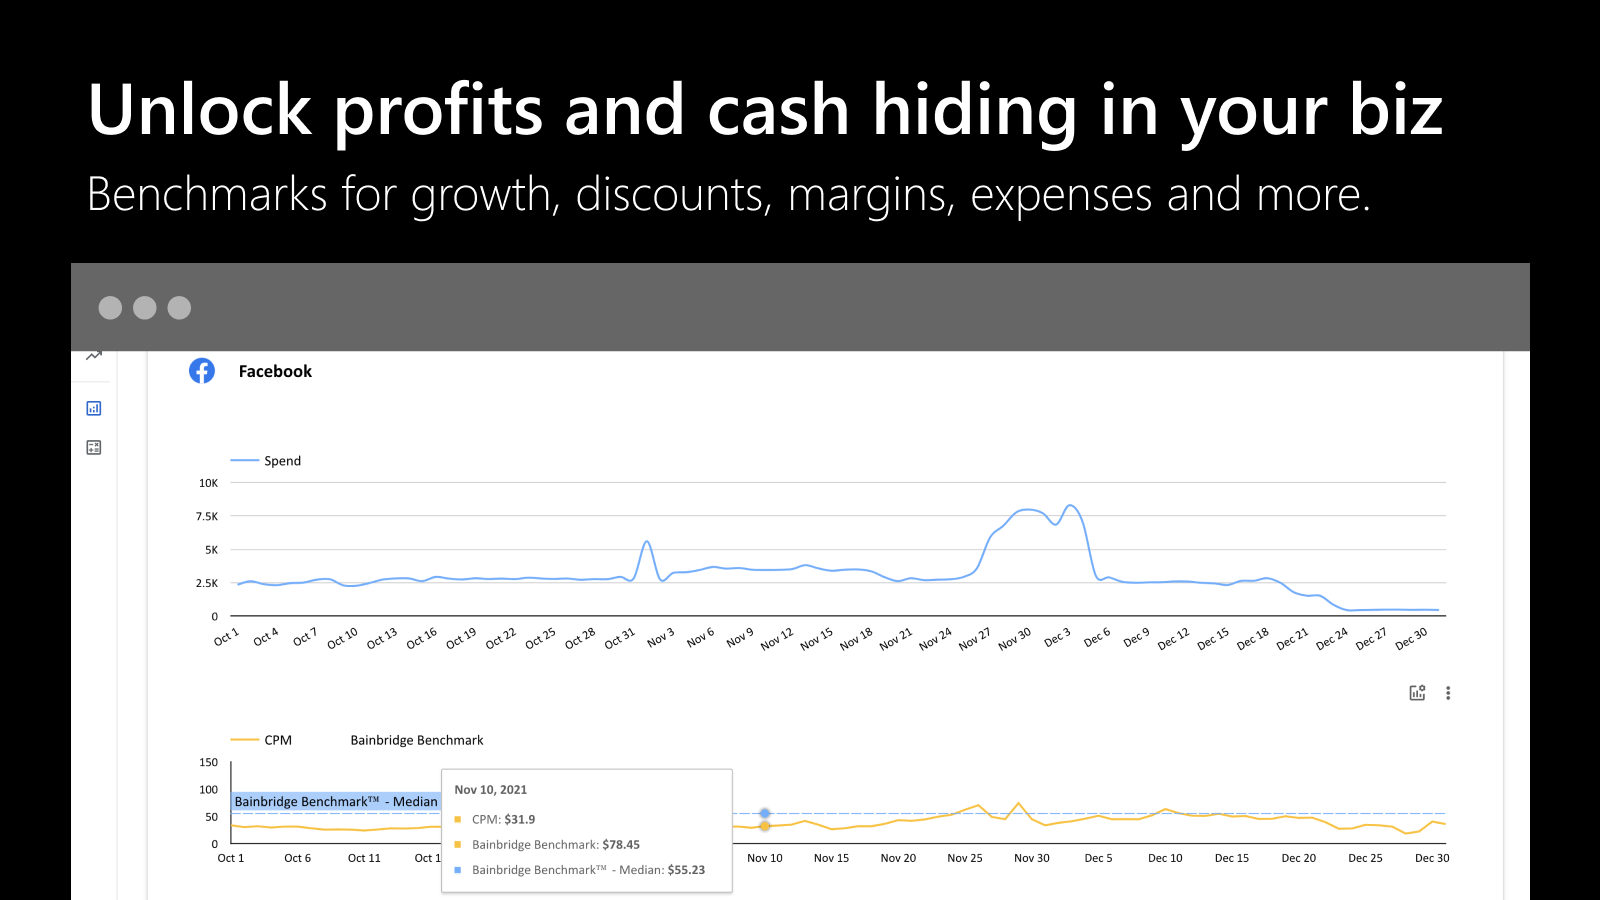 Unlock profits and cash hiding in your business